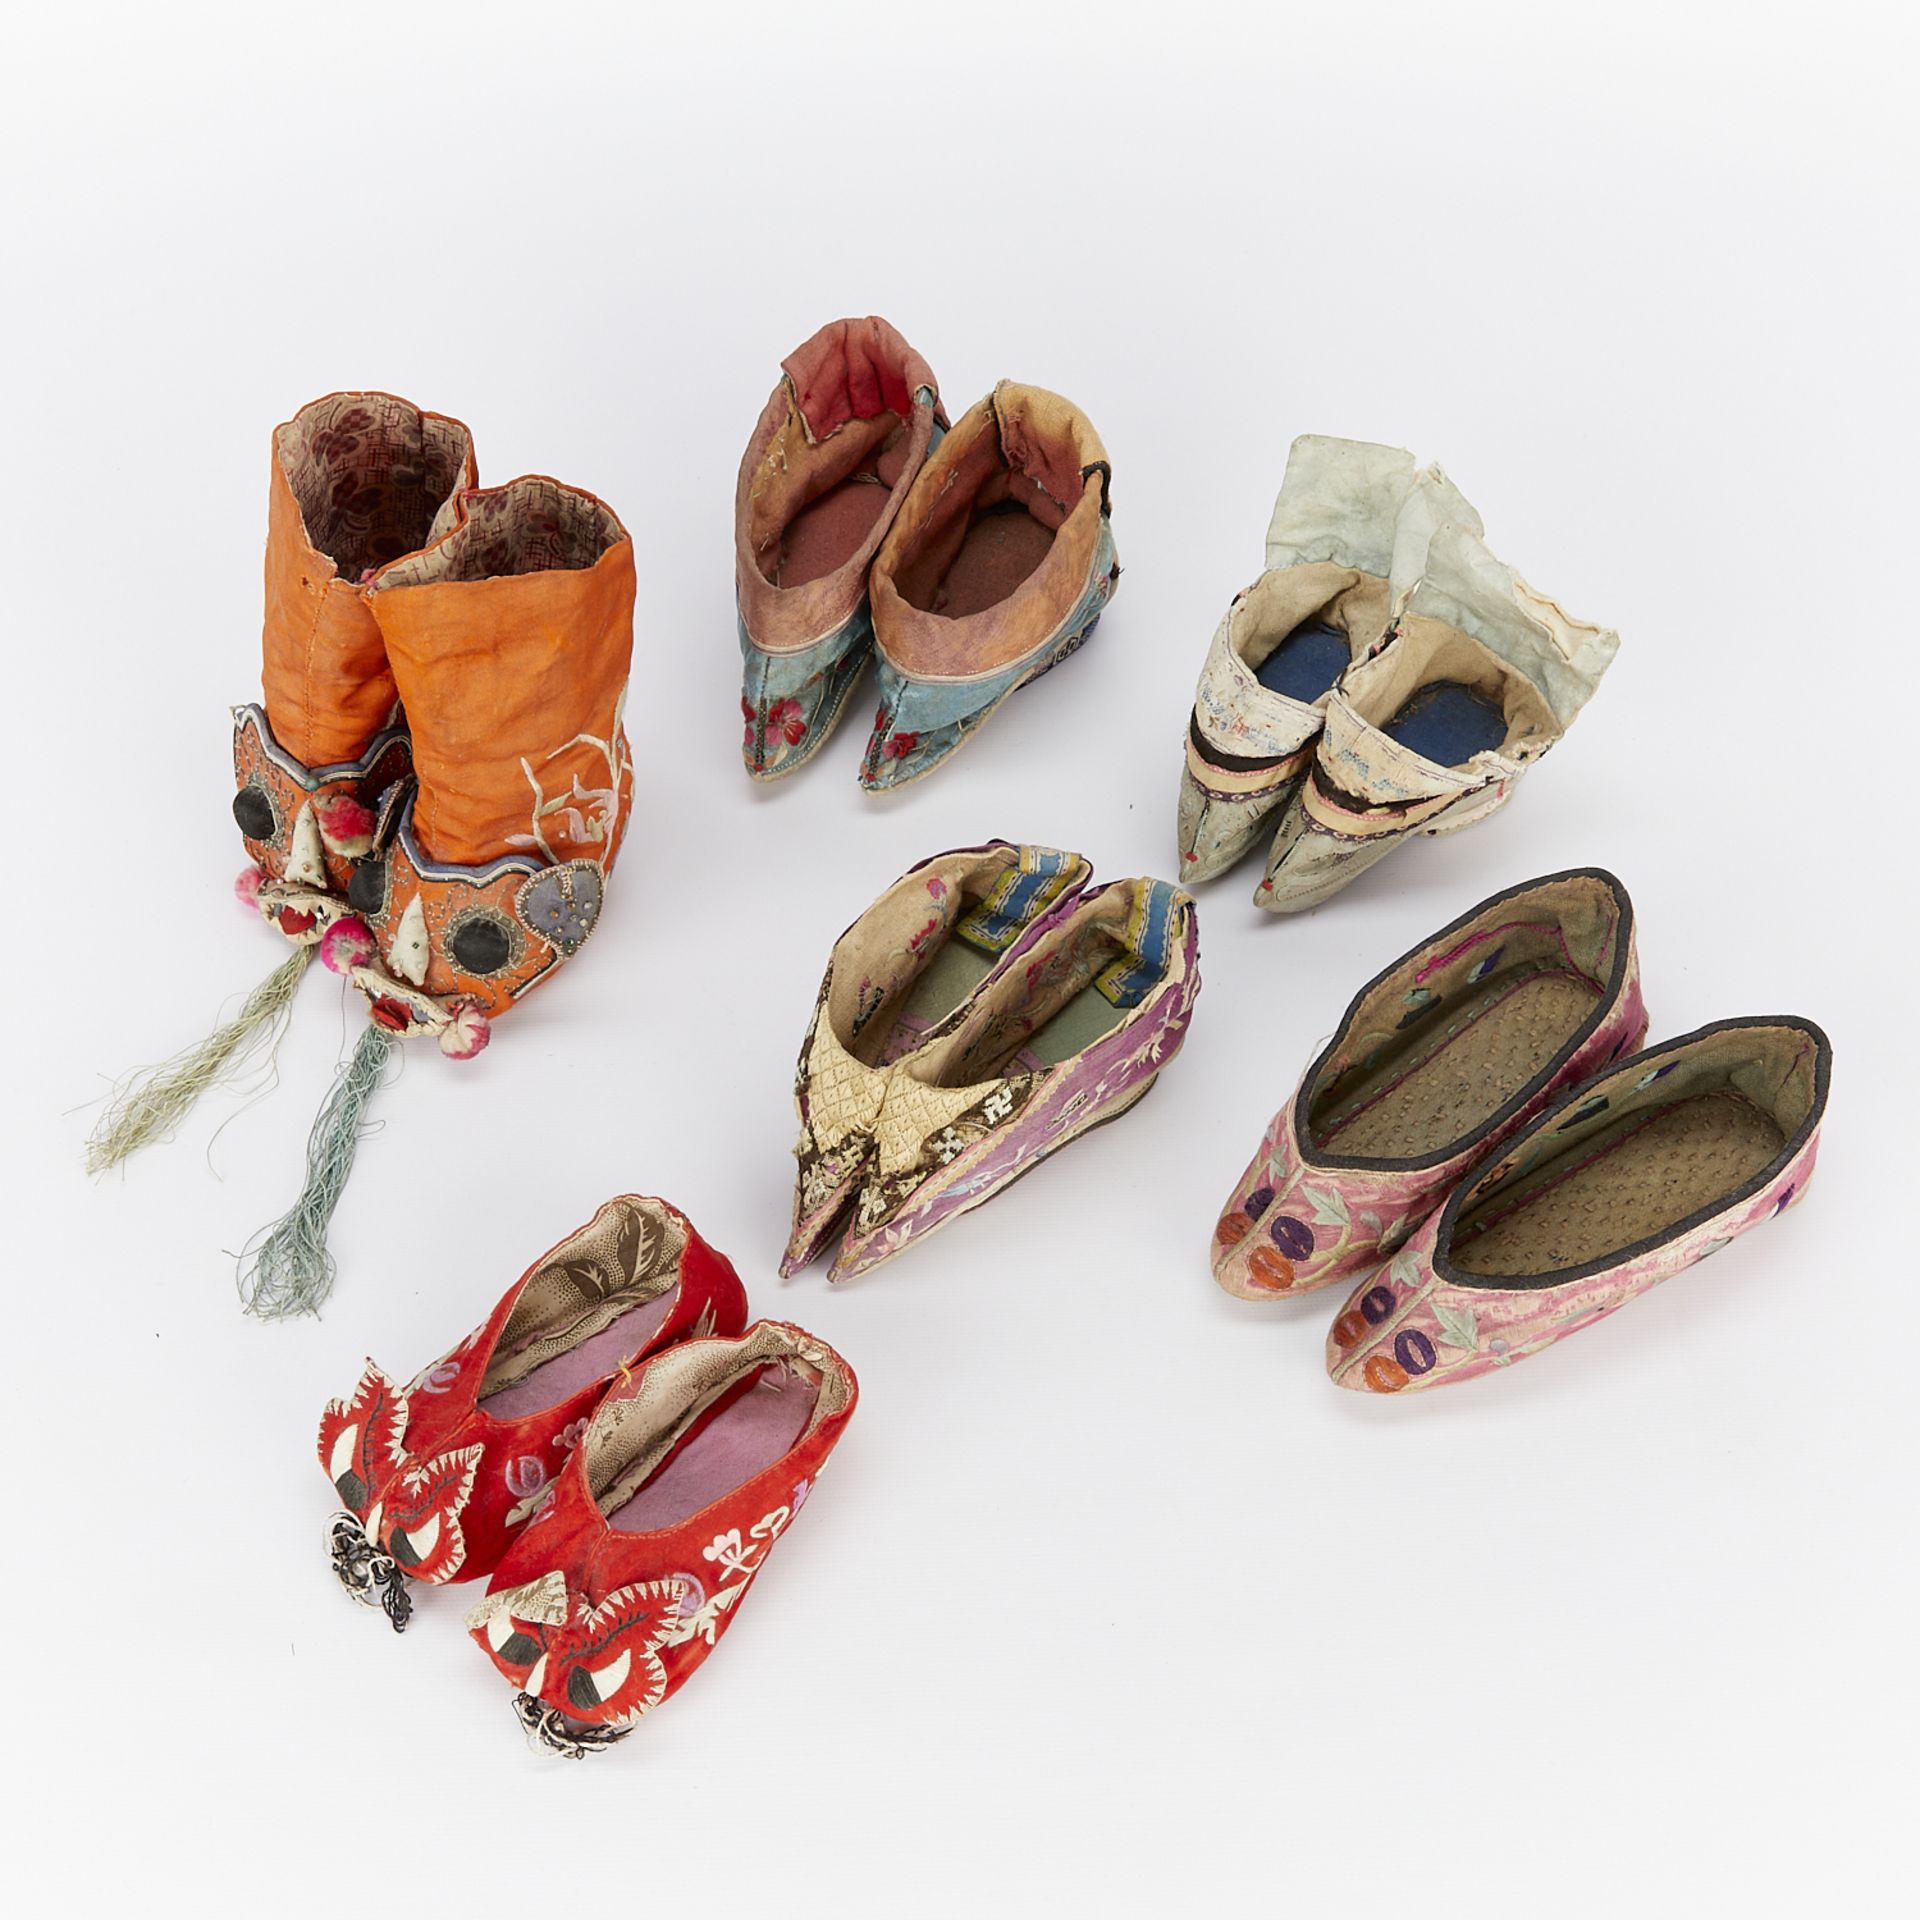 6 Pairs of Chinese Silk Foot Binding Shoes - Image 6 of 12